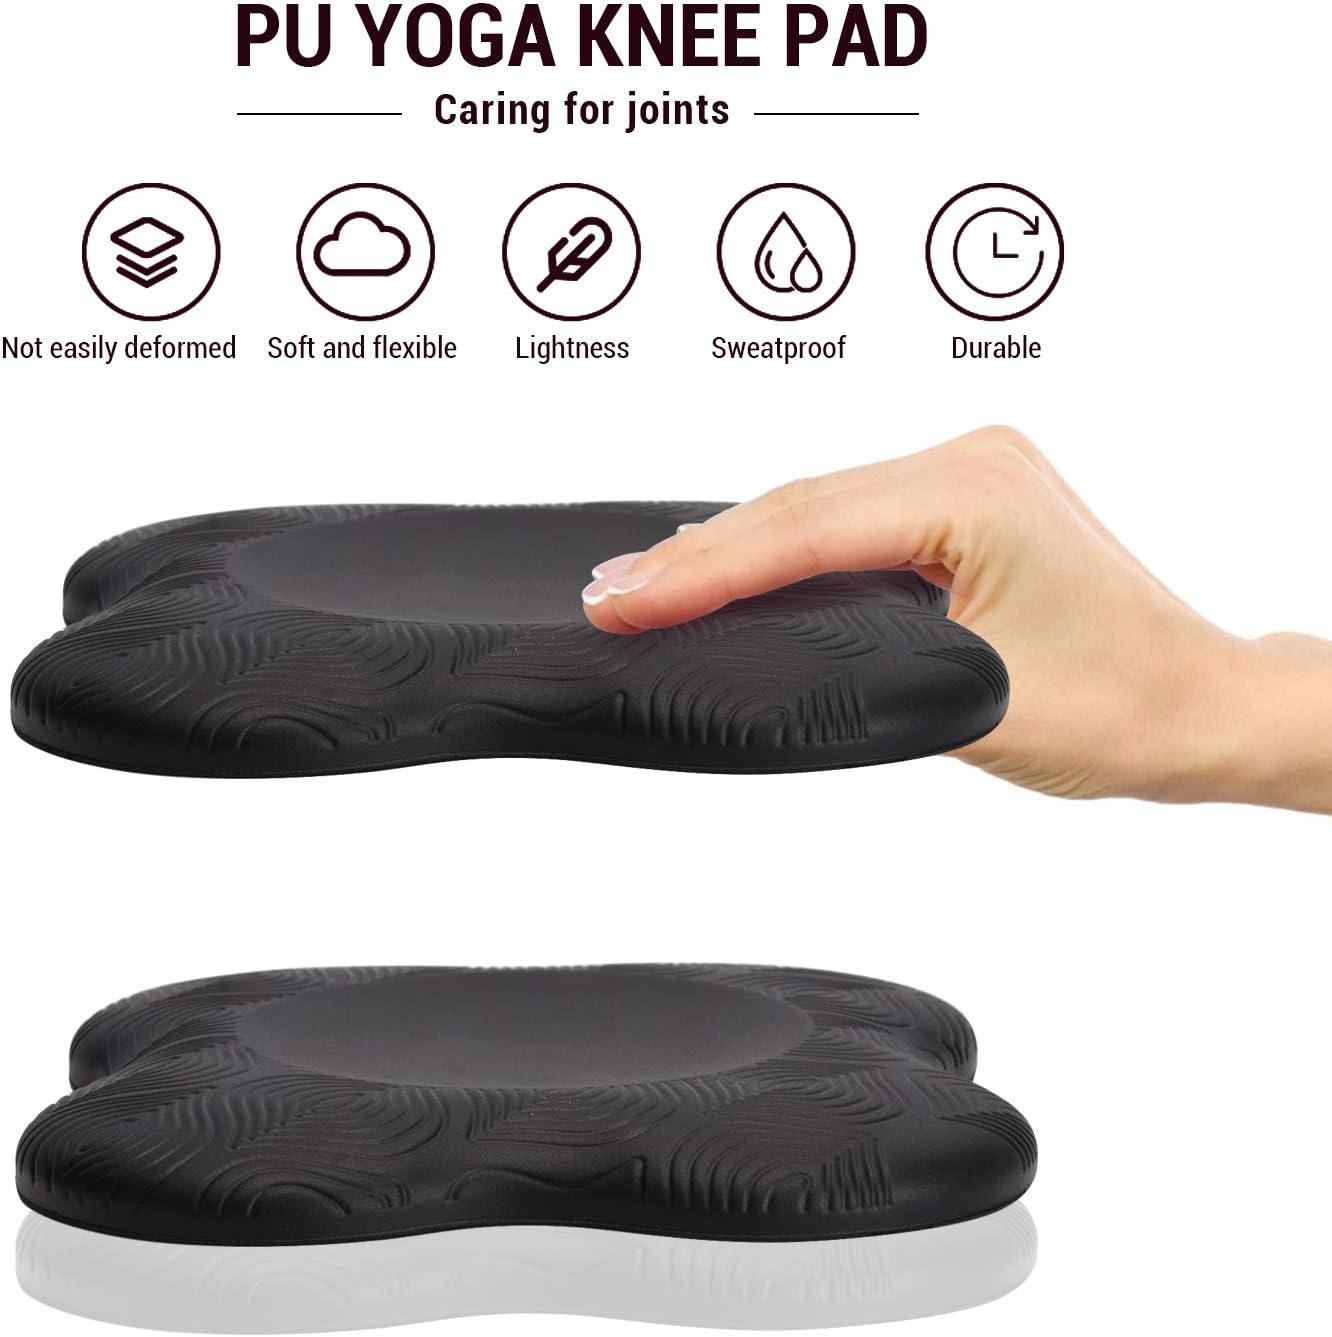 Pilates Mat Knee Protection Yoga Sports with Knee/elbow Support Cushion  Non-slip